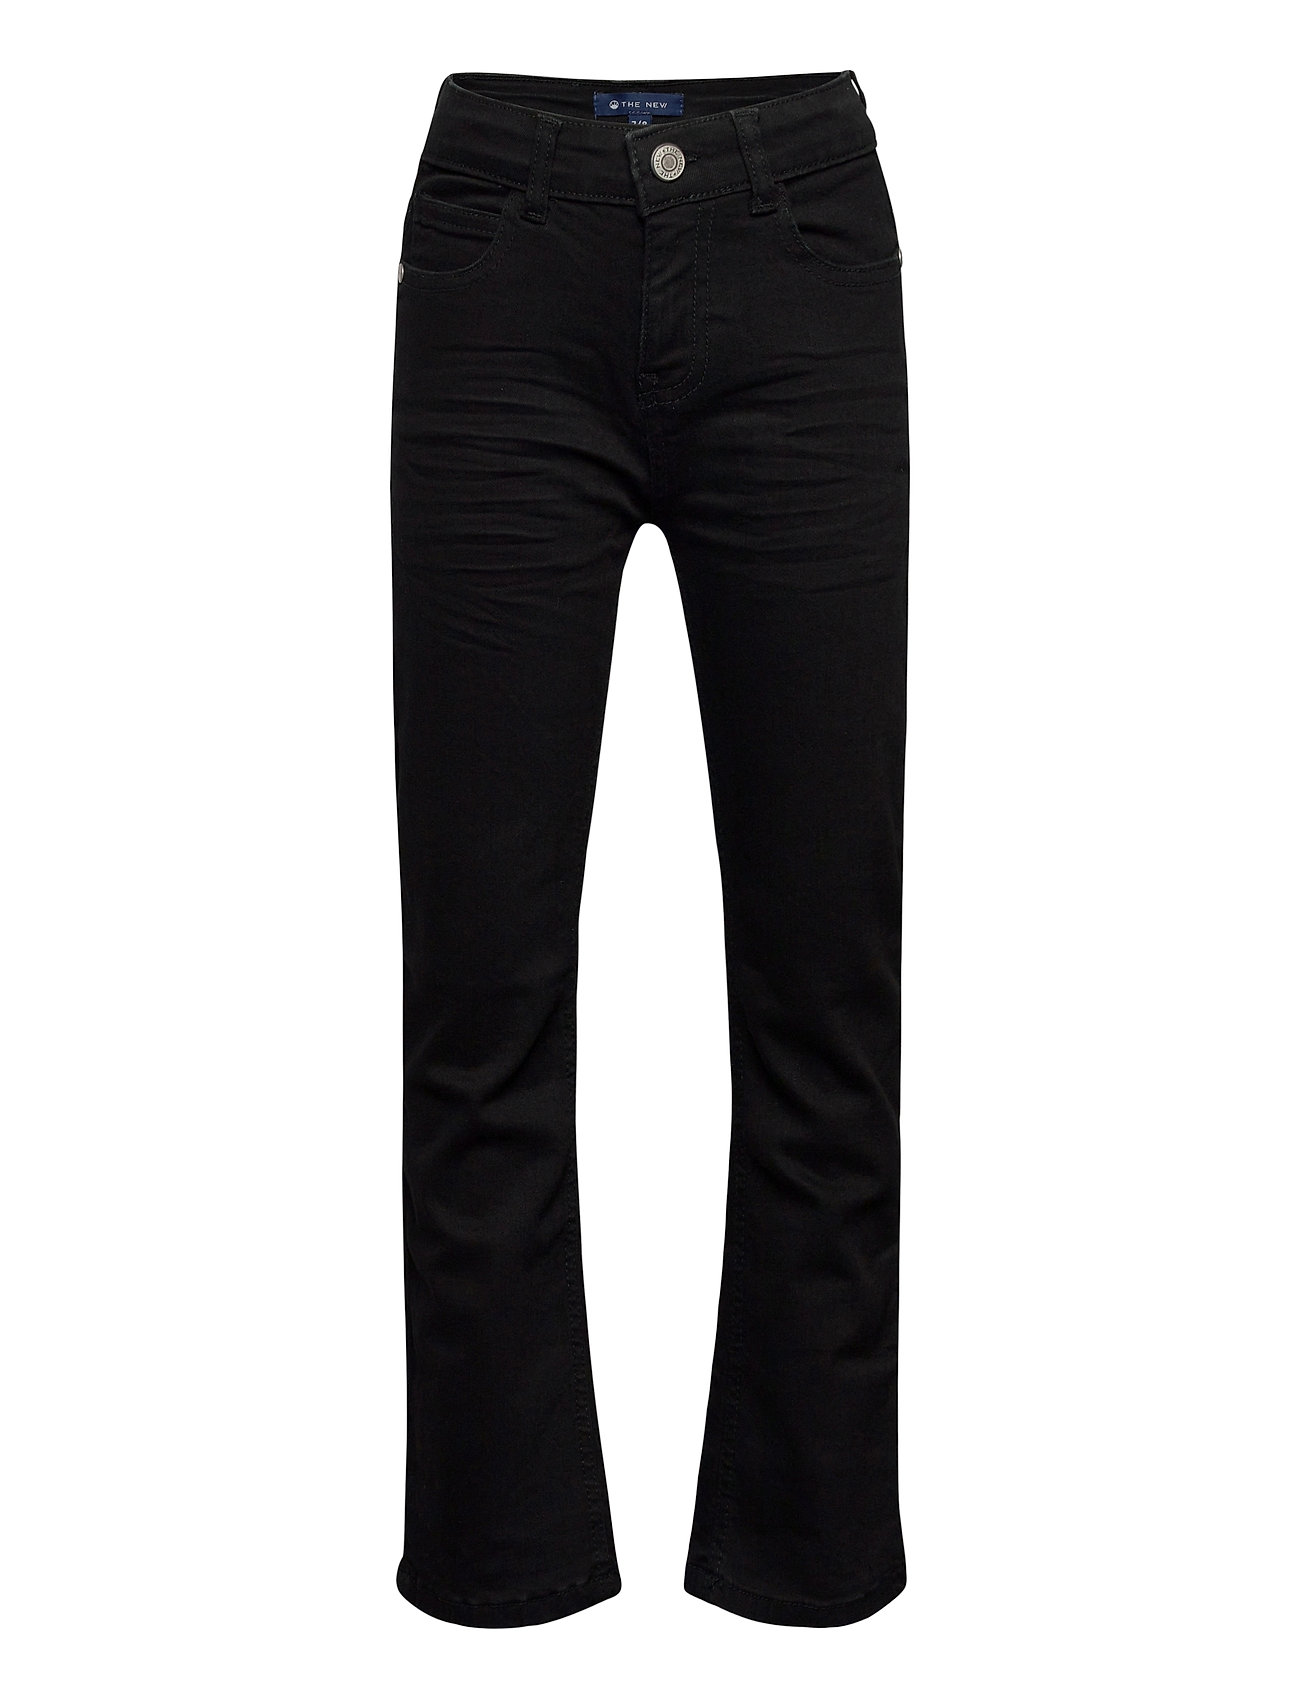 Sthlm Heavy Pants - Washed Out Black